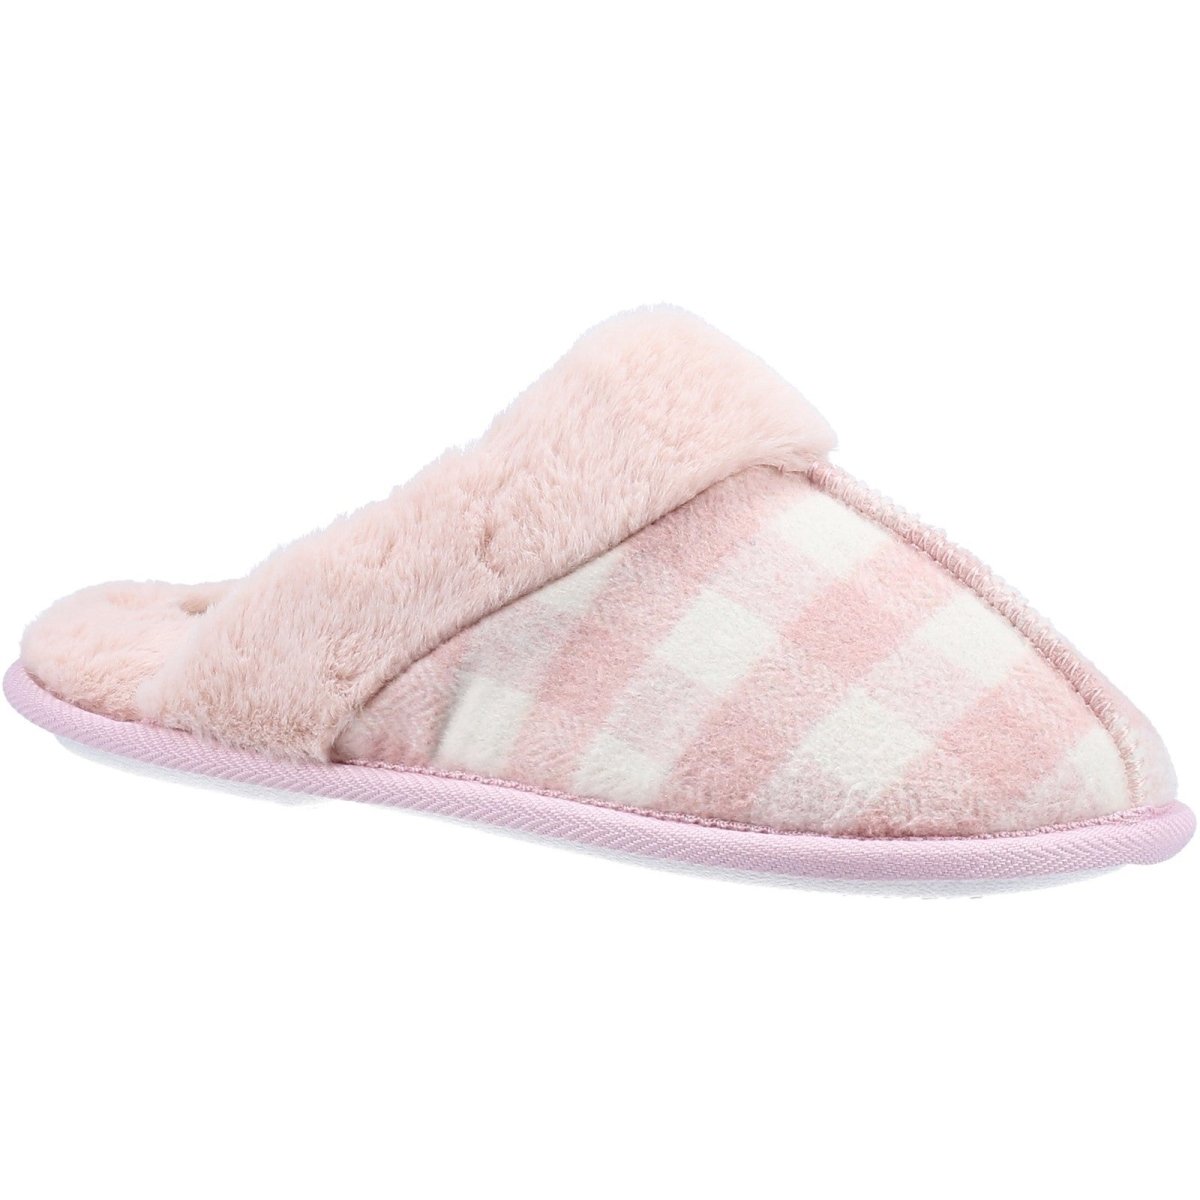 Fleet & Foster Neath Chequered Warm Ladies Mule Slippers - Shoe Store Direct